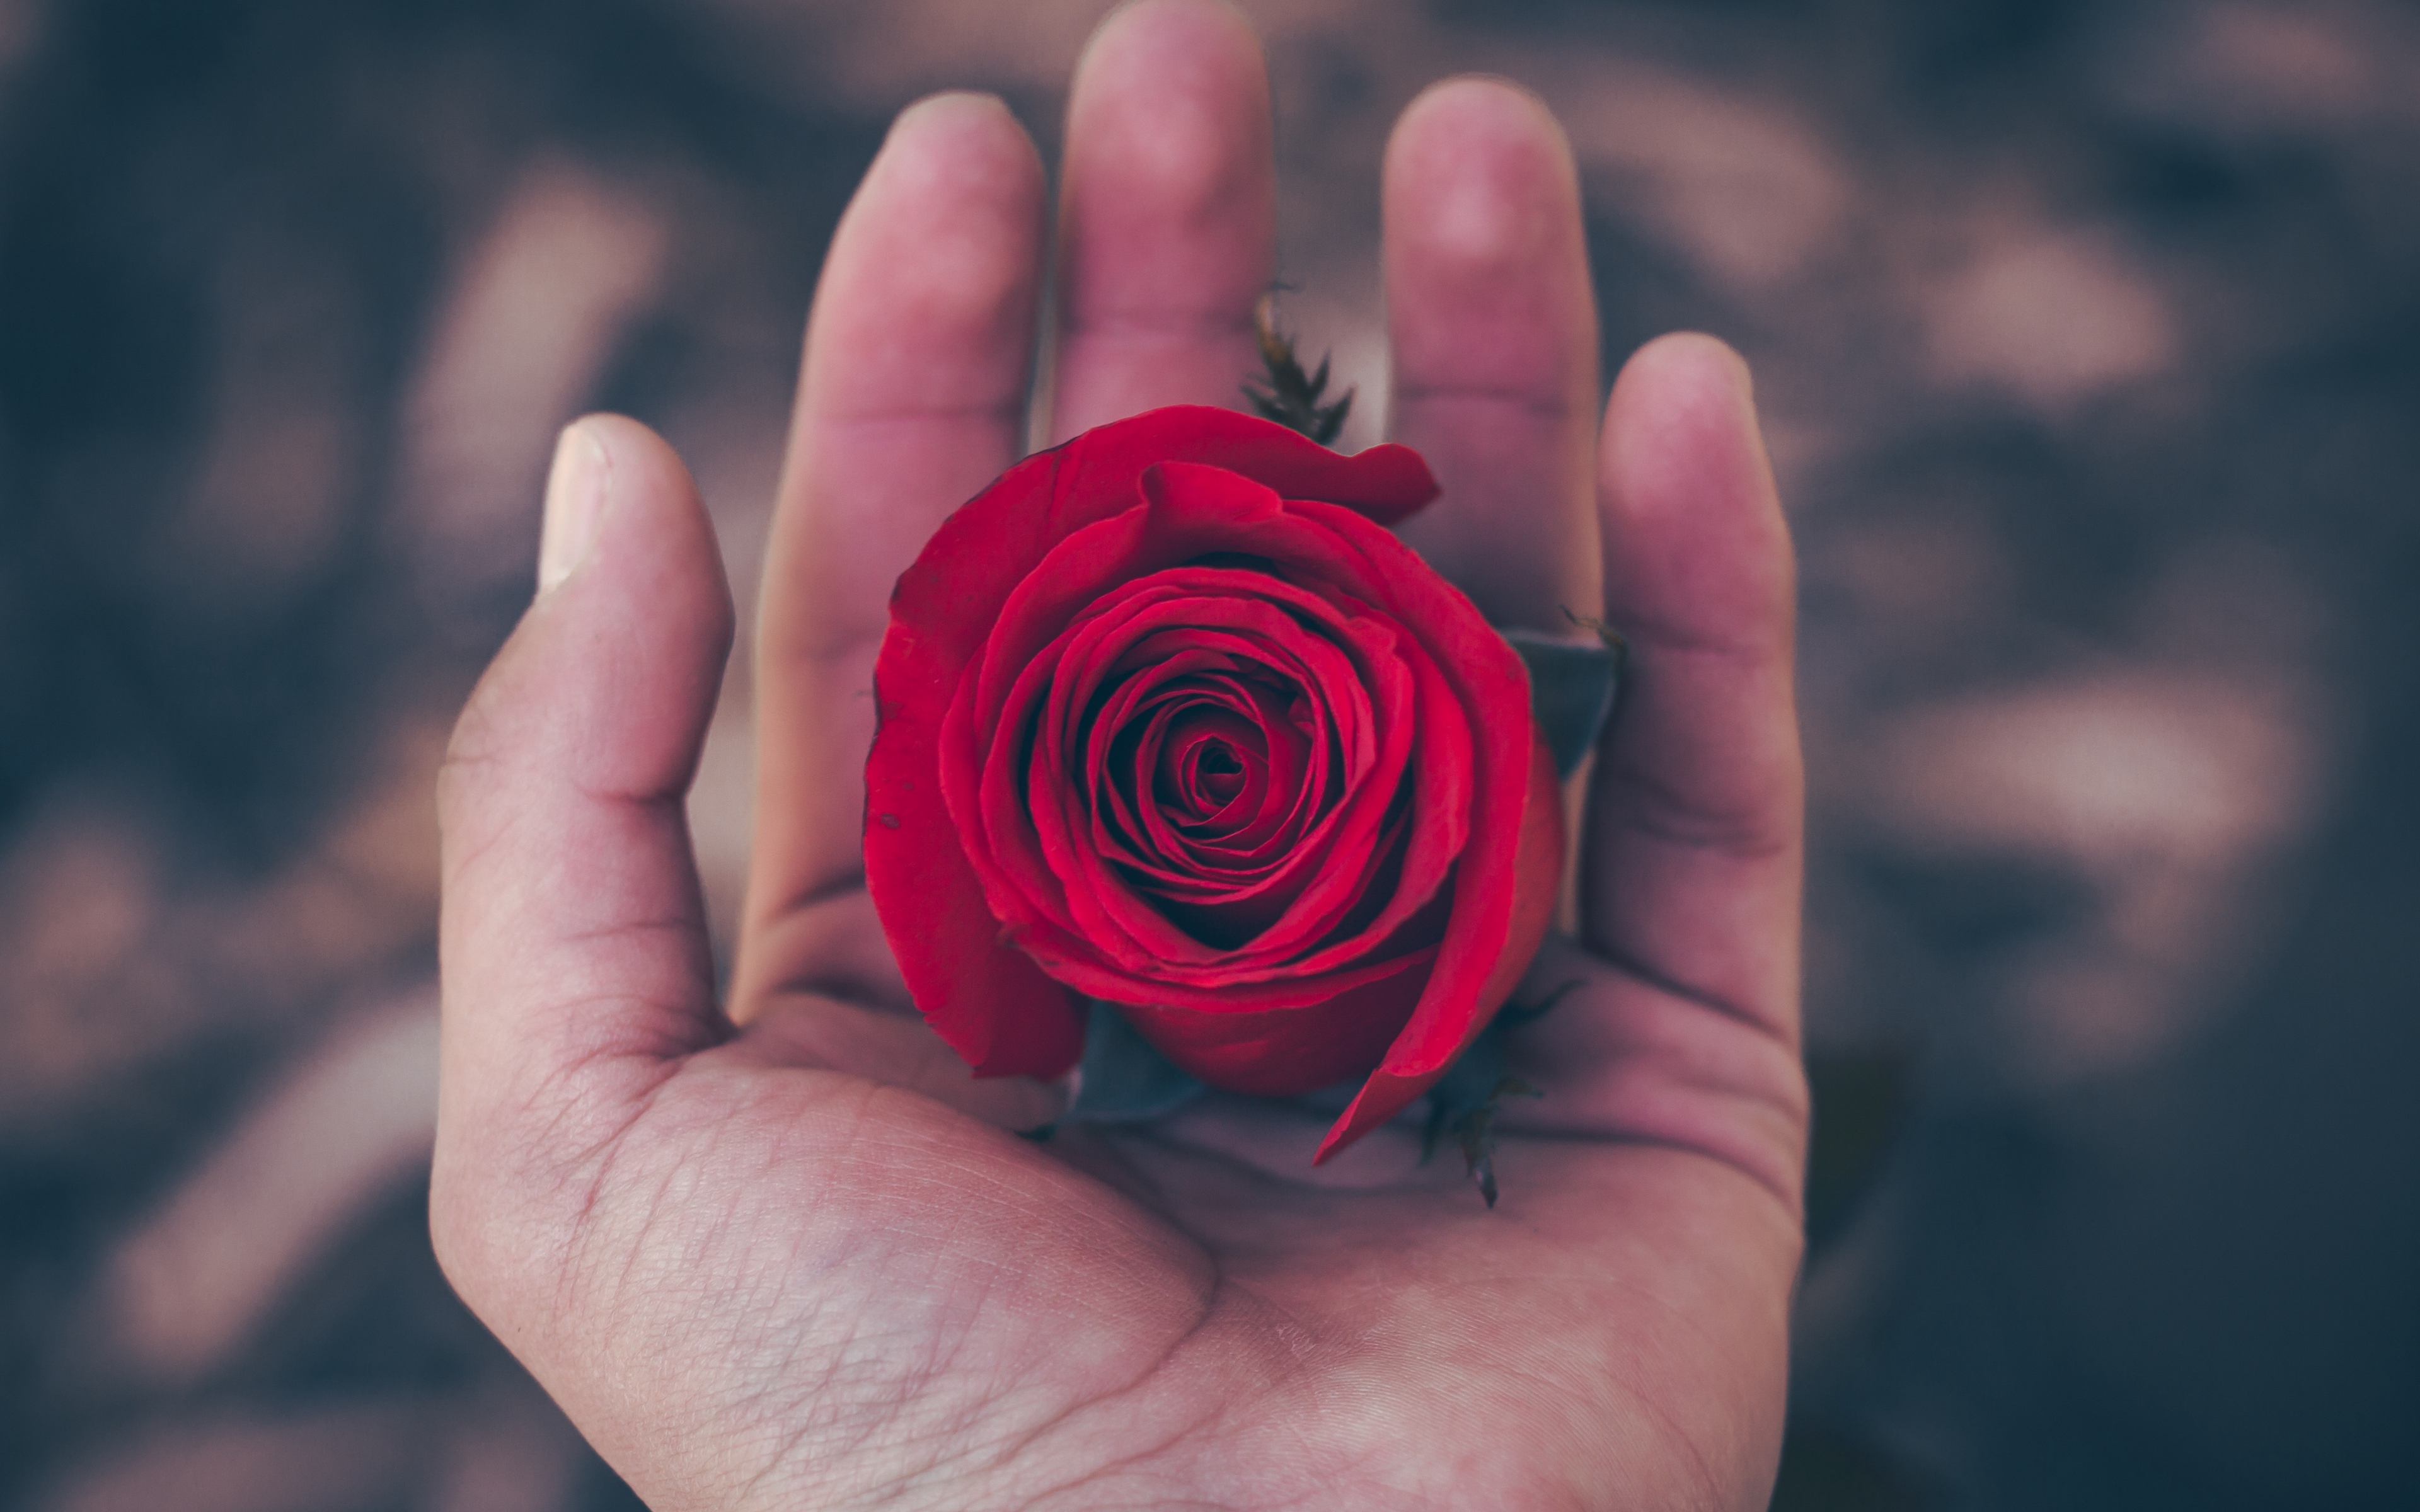 Wallpaper Rose, Hand, Red, Bud - Hand Holding A Rose Petal , HD Wallpaper & Backgrounds